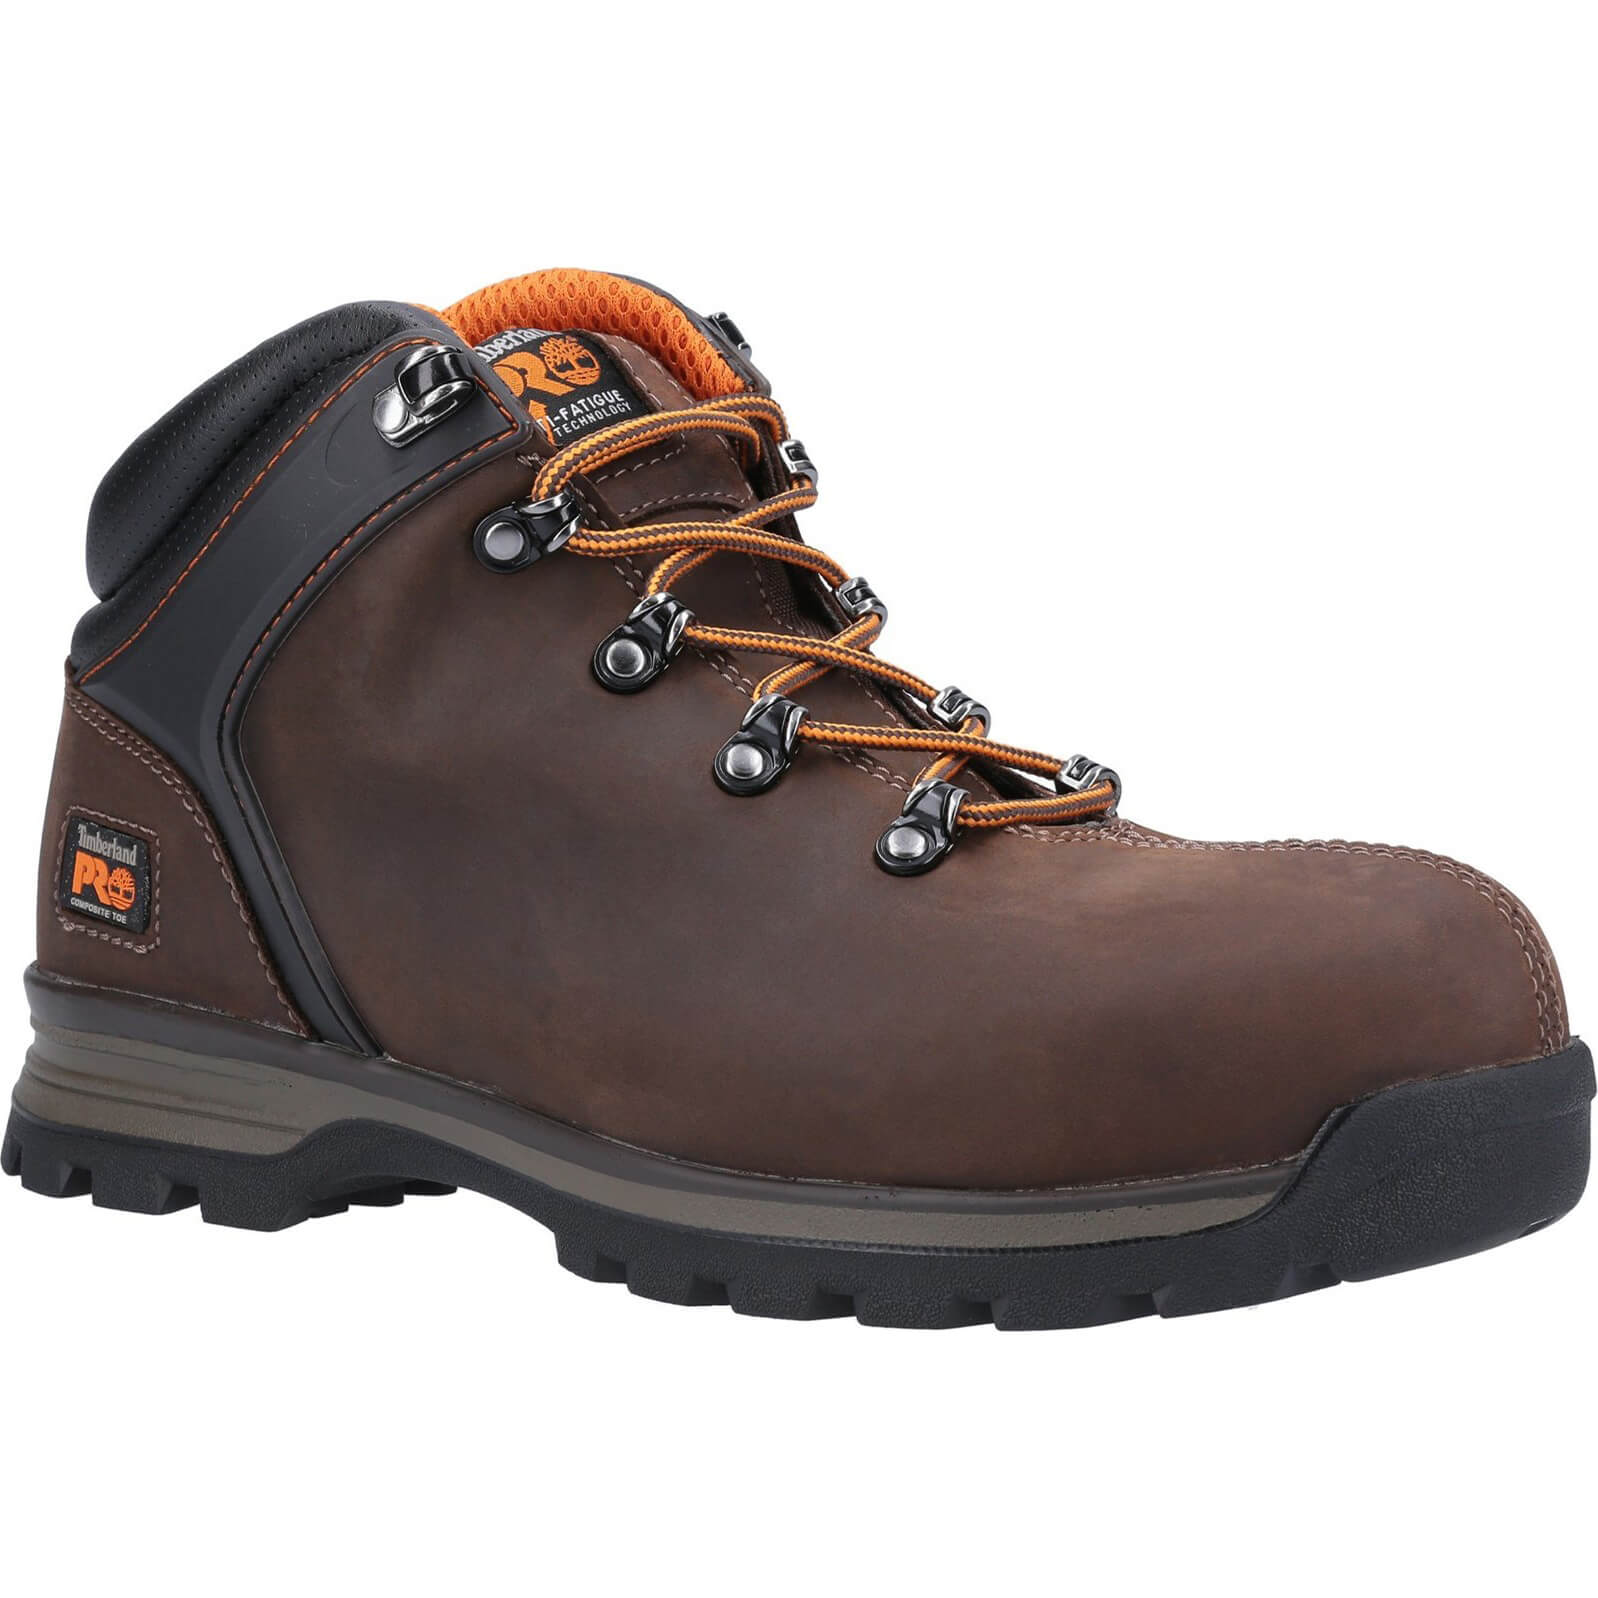 Image of Timberland Pro Splitrock XT Composite Safety Toe Work Boot Brown Size 11